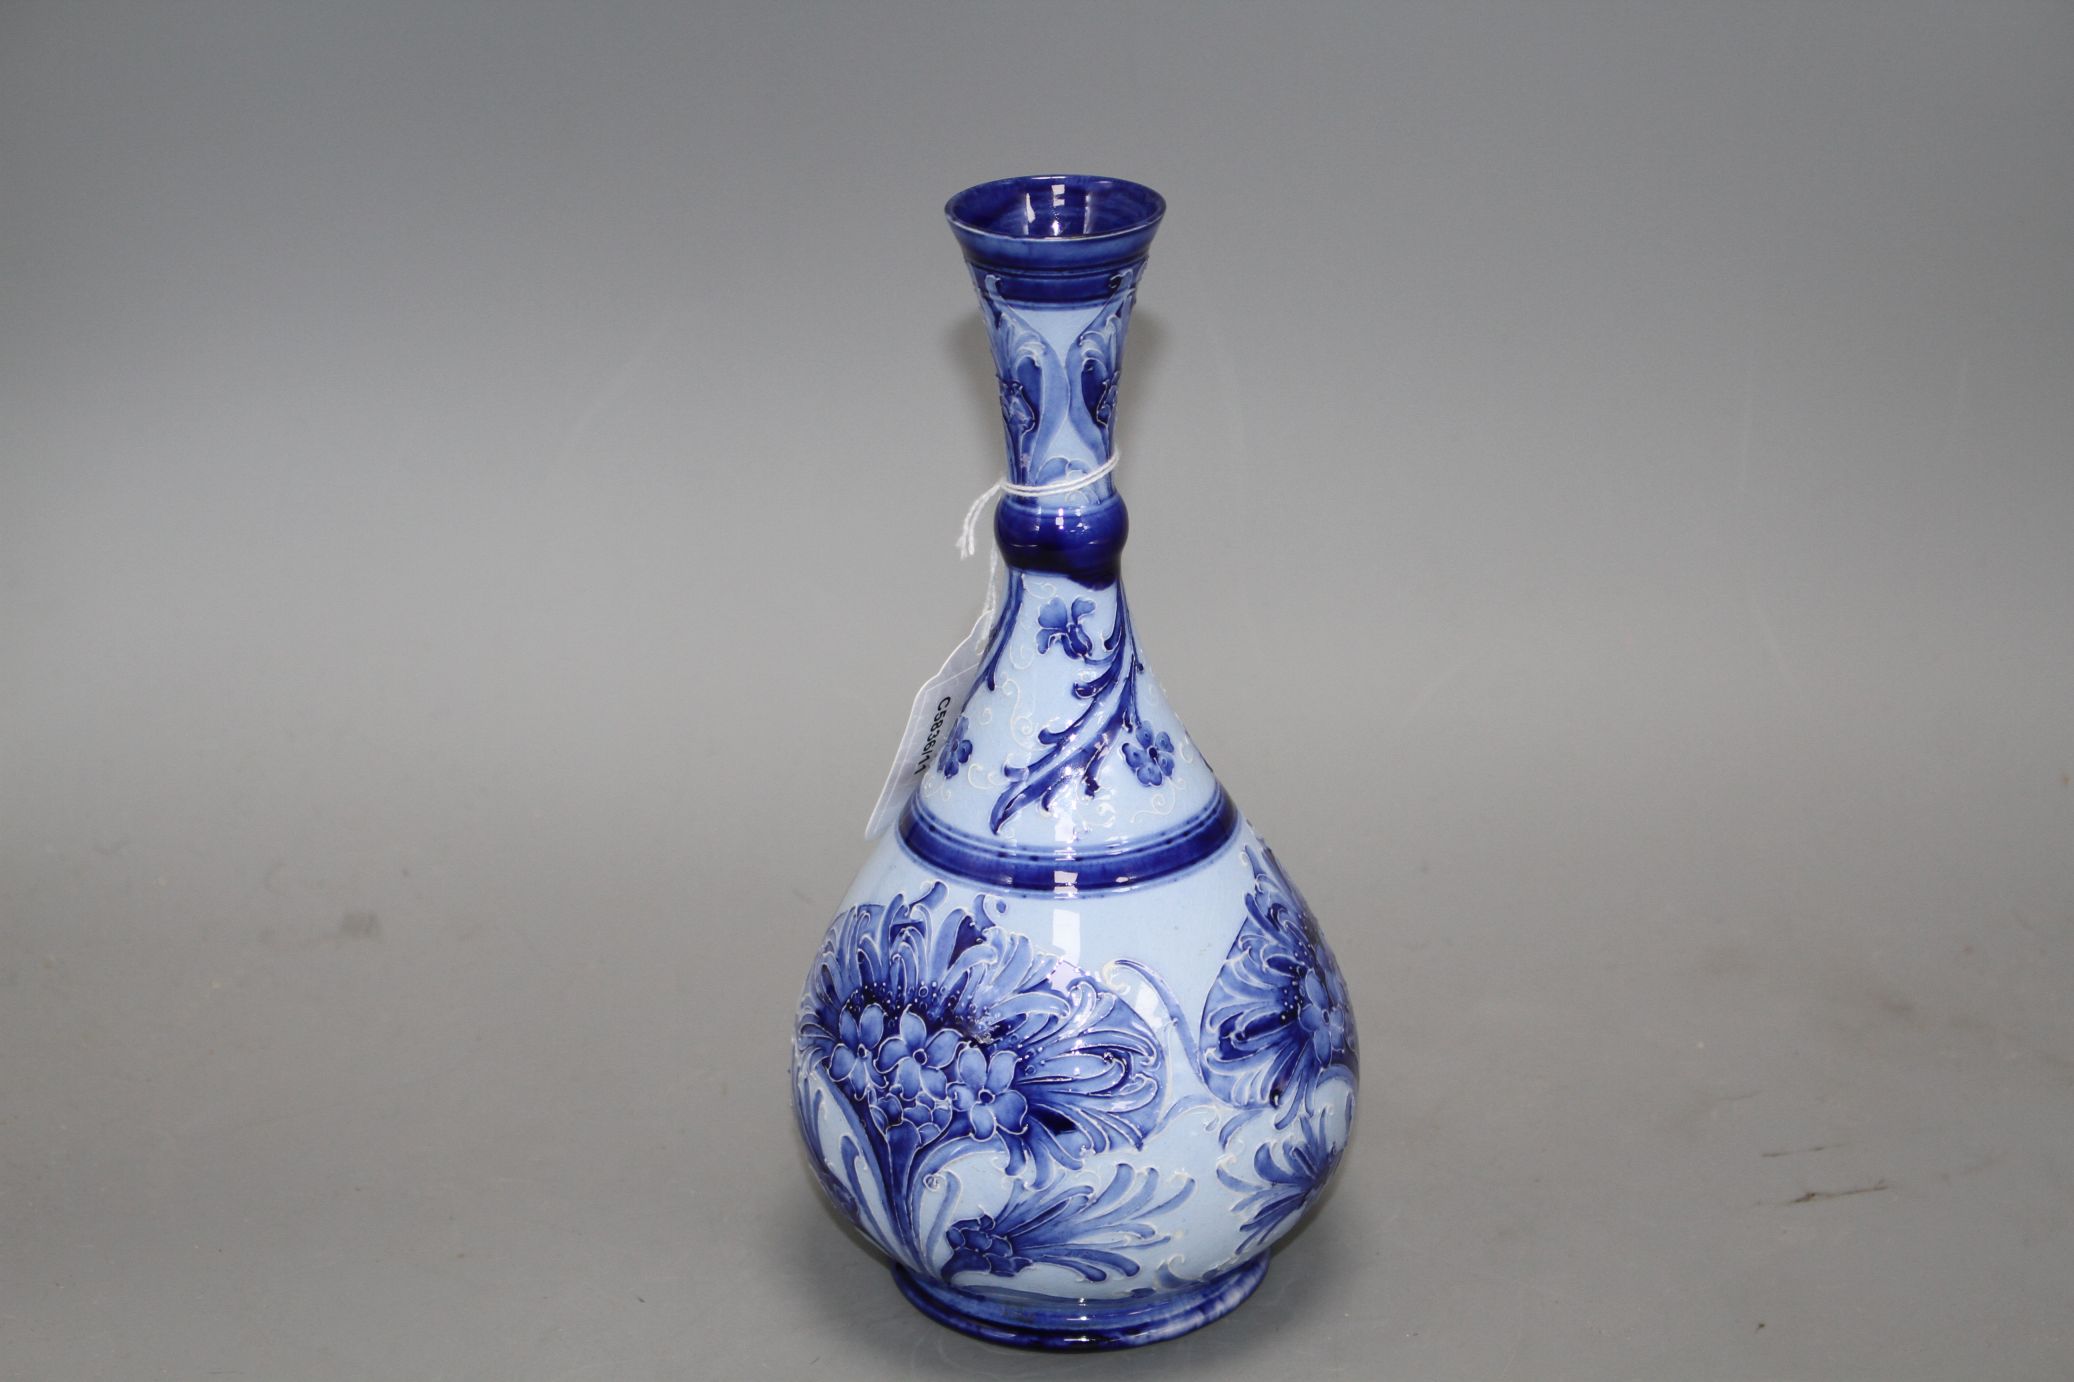 A Moorcroft Macintyre Florian ware vase, 22.5cm Condition: A few small firing flaws in the glaze - Image 2 of 4